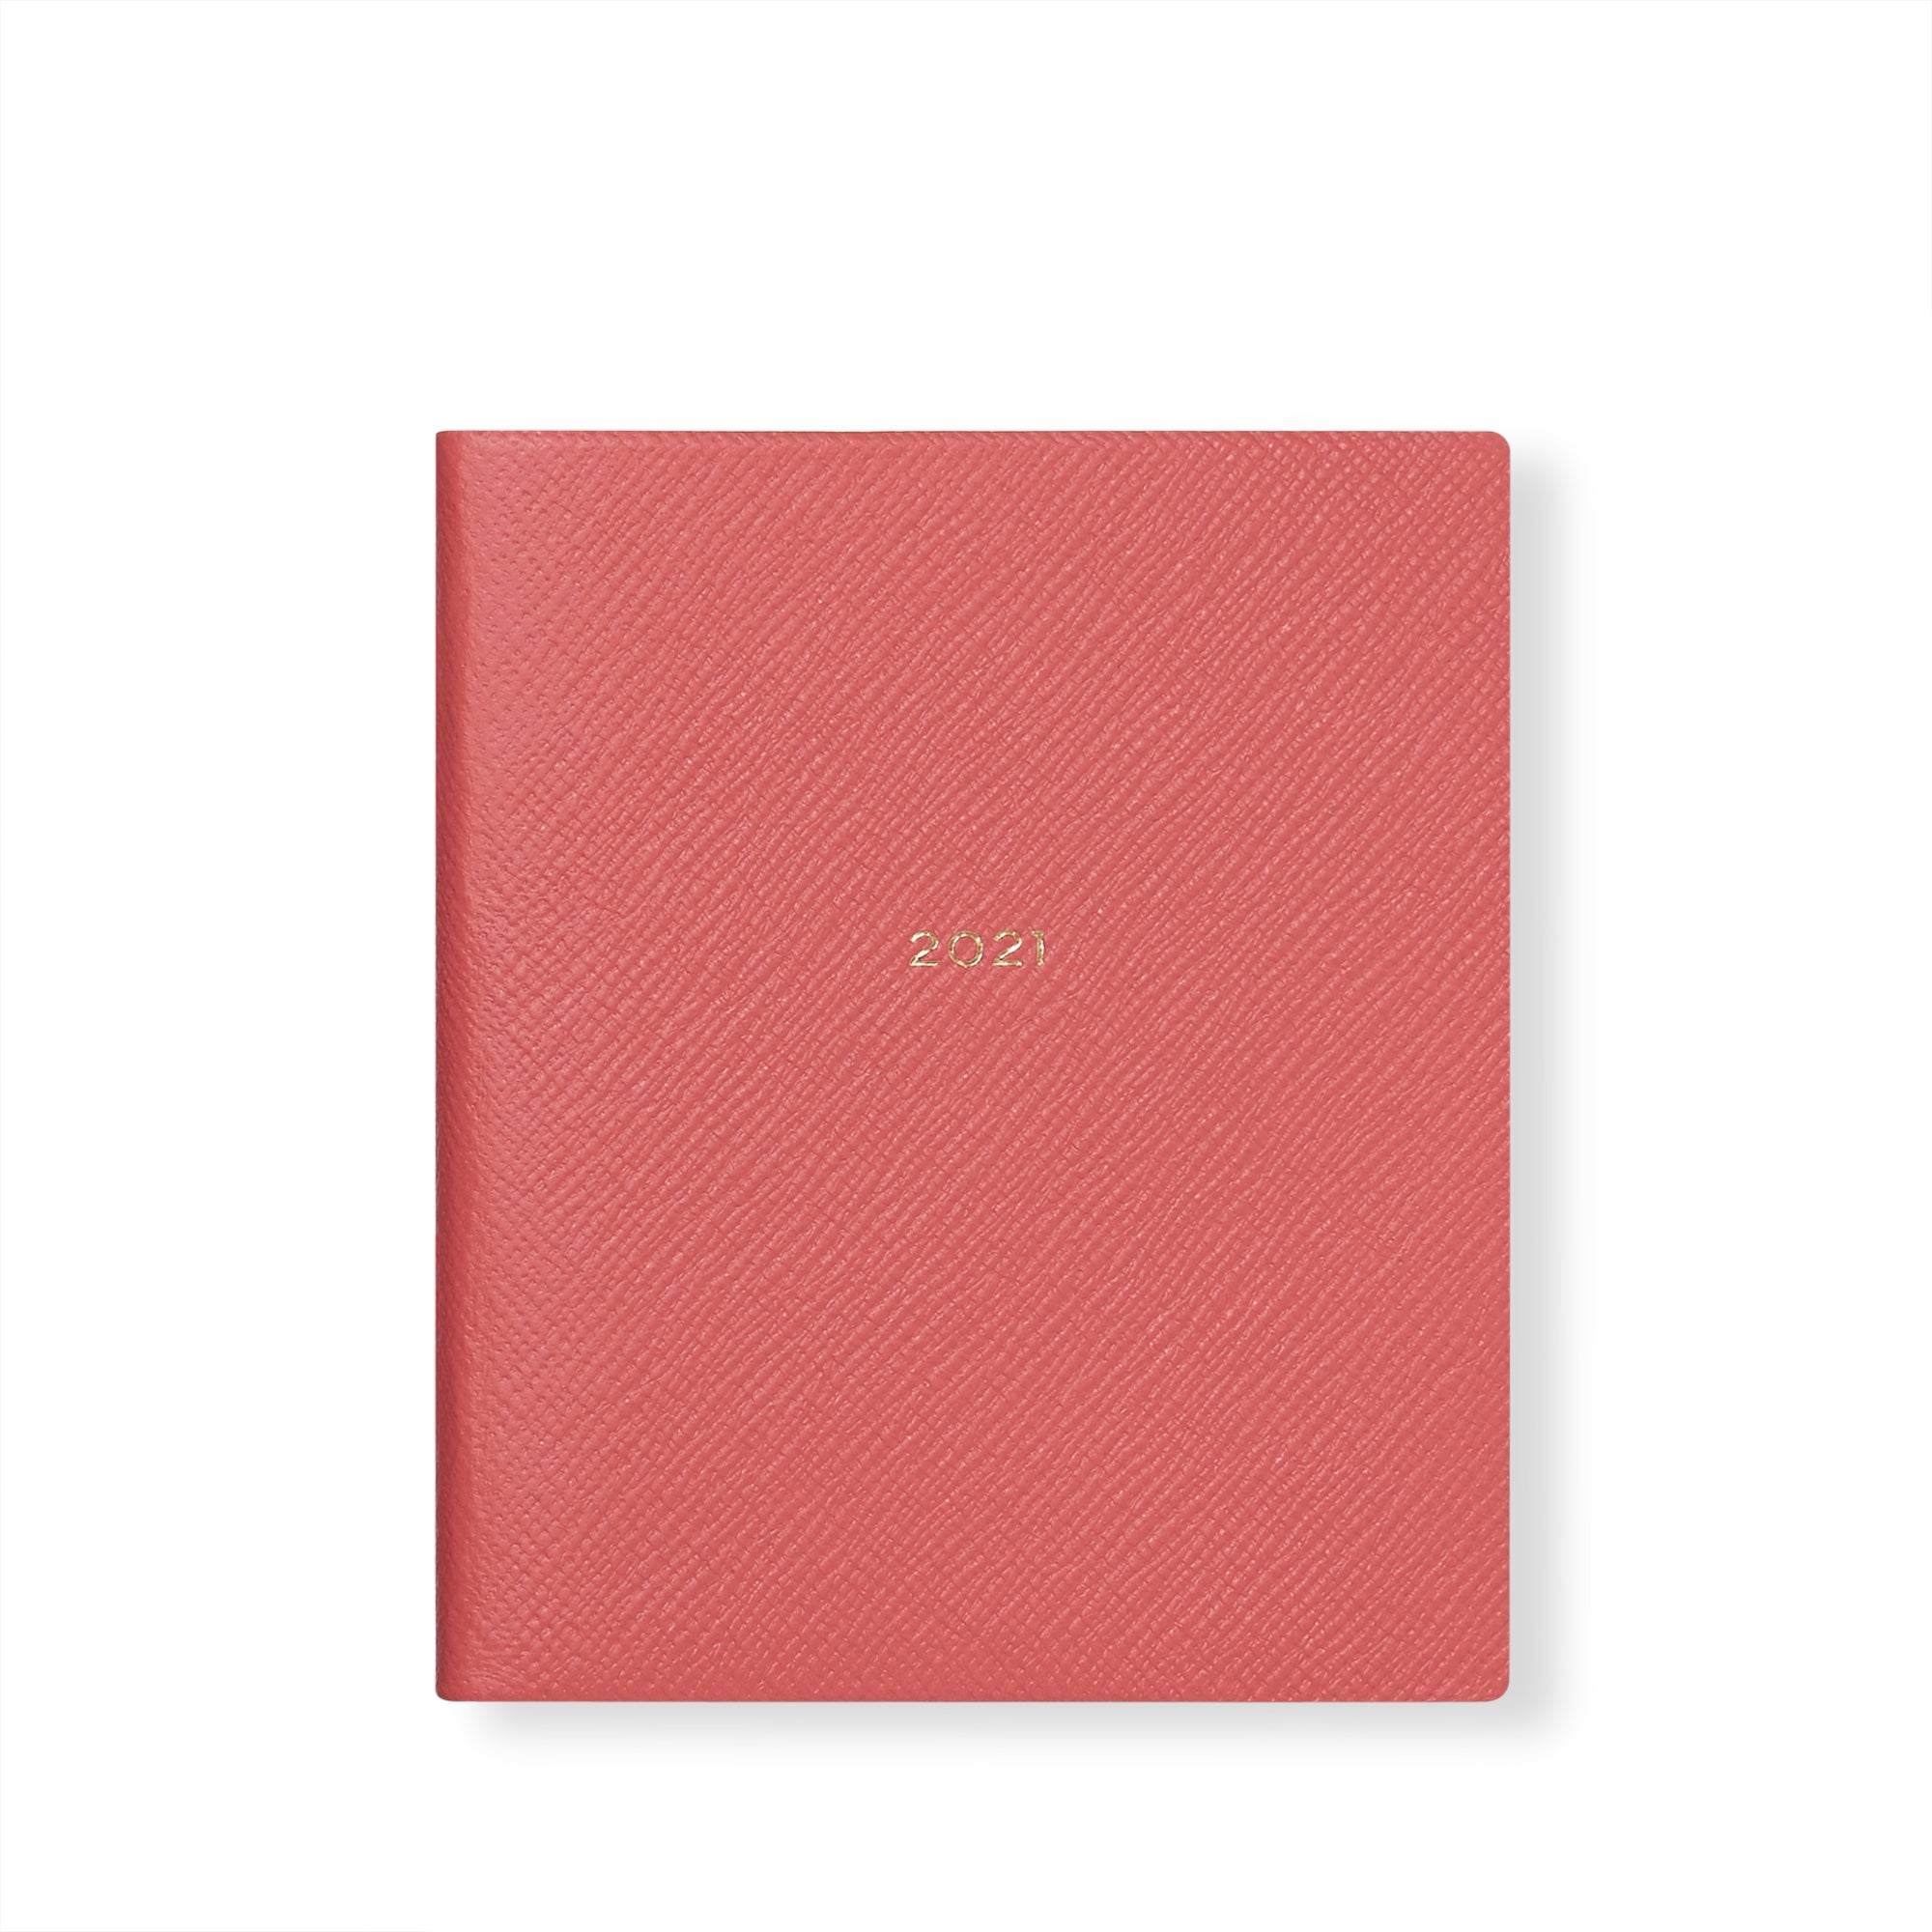 The Most Stylish Diaries (For An Optimistic 2021)